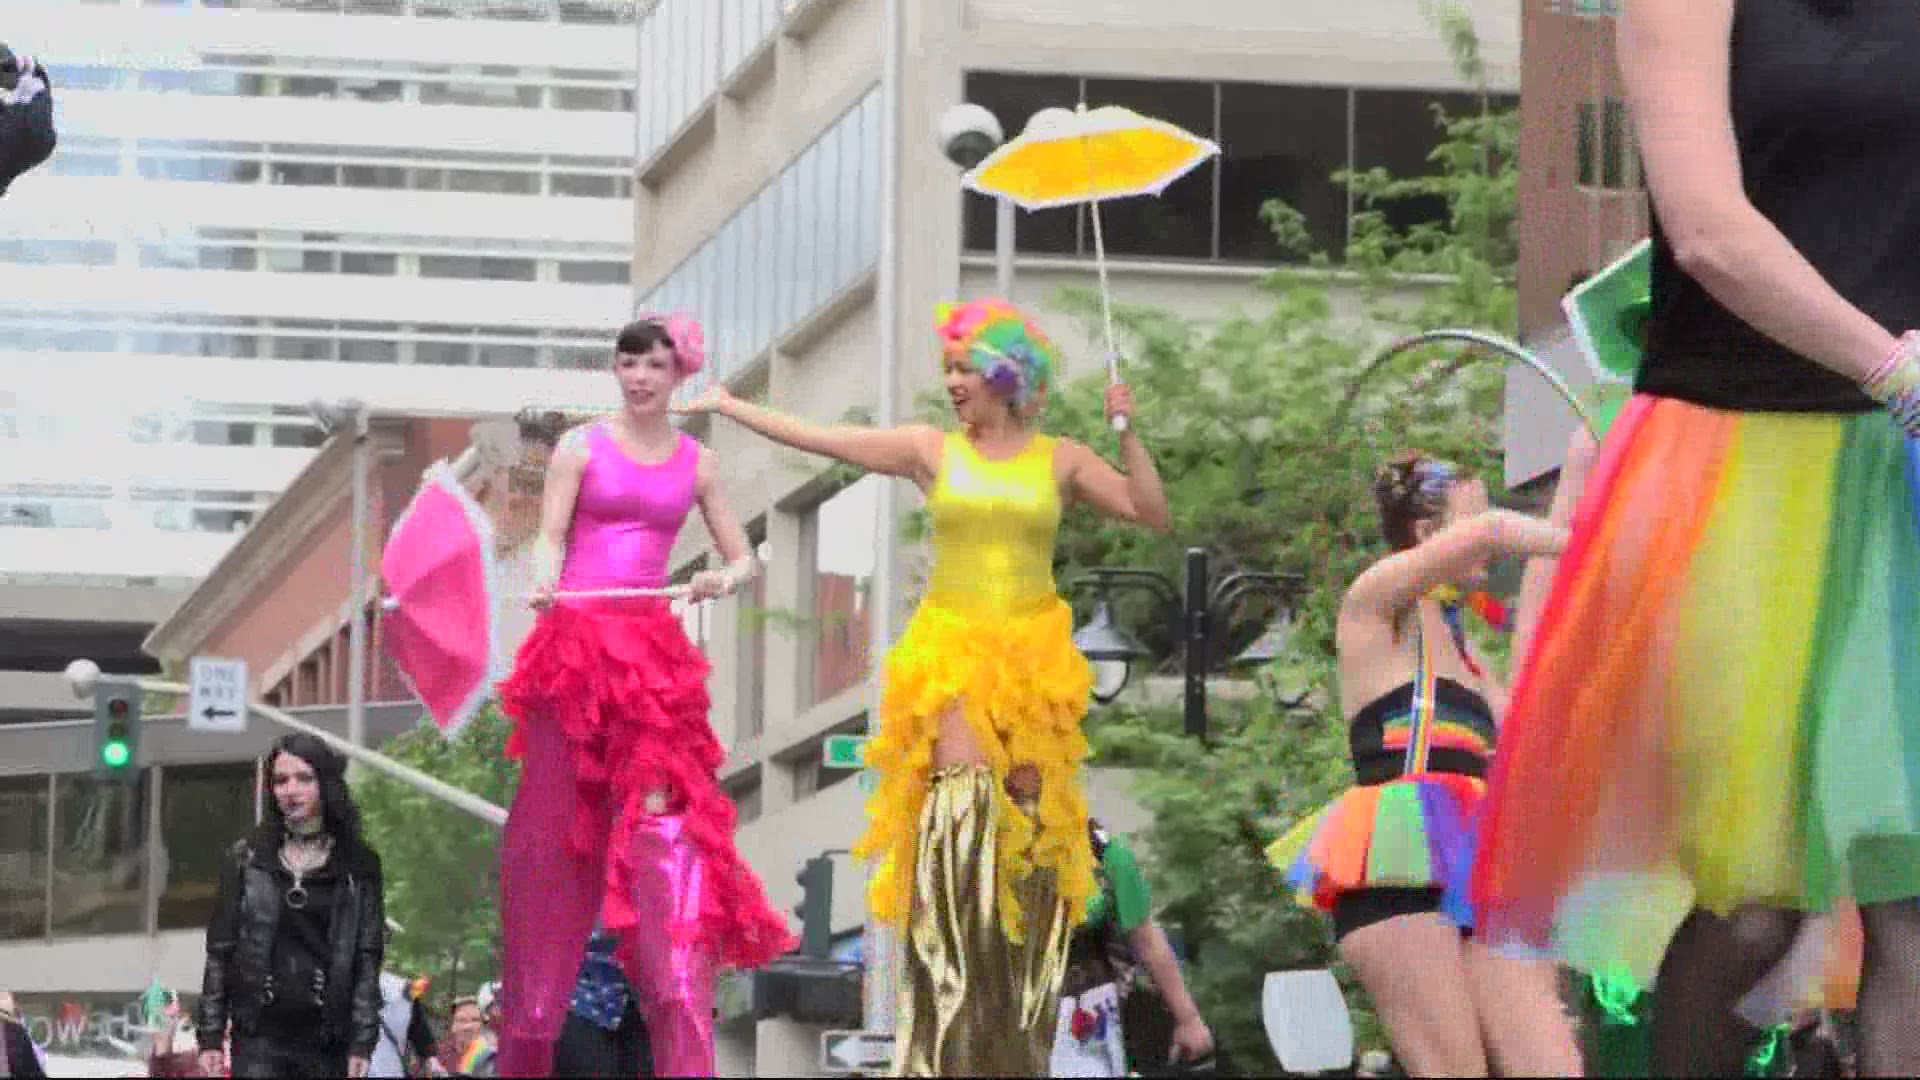 Celebrating Pride looked different this year in Spokane due to the coronavirus, but organizers did not let that get their spirits down.